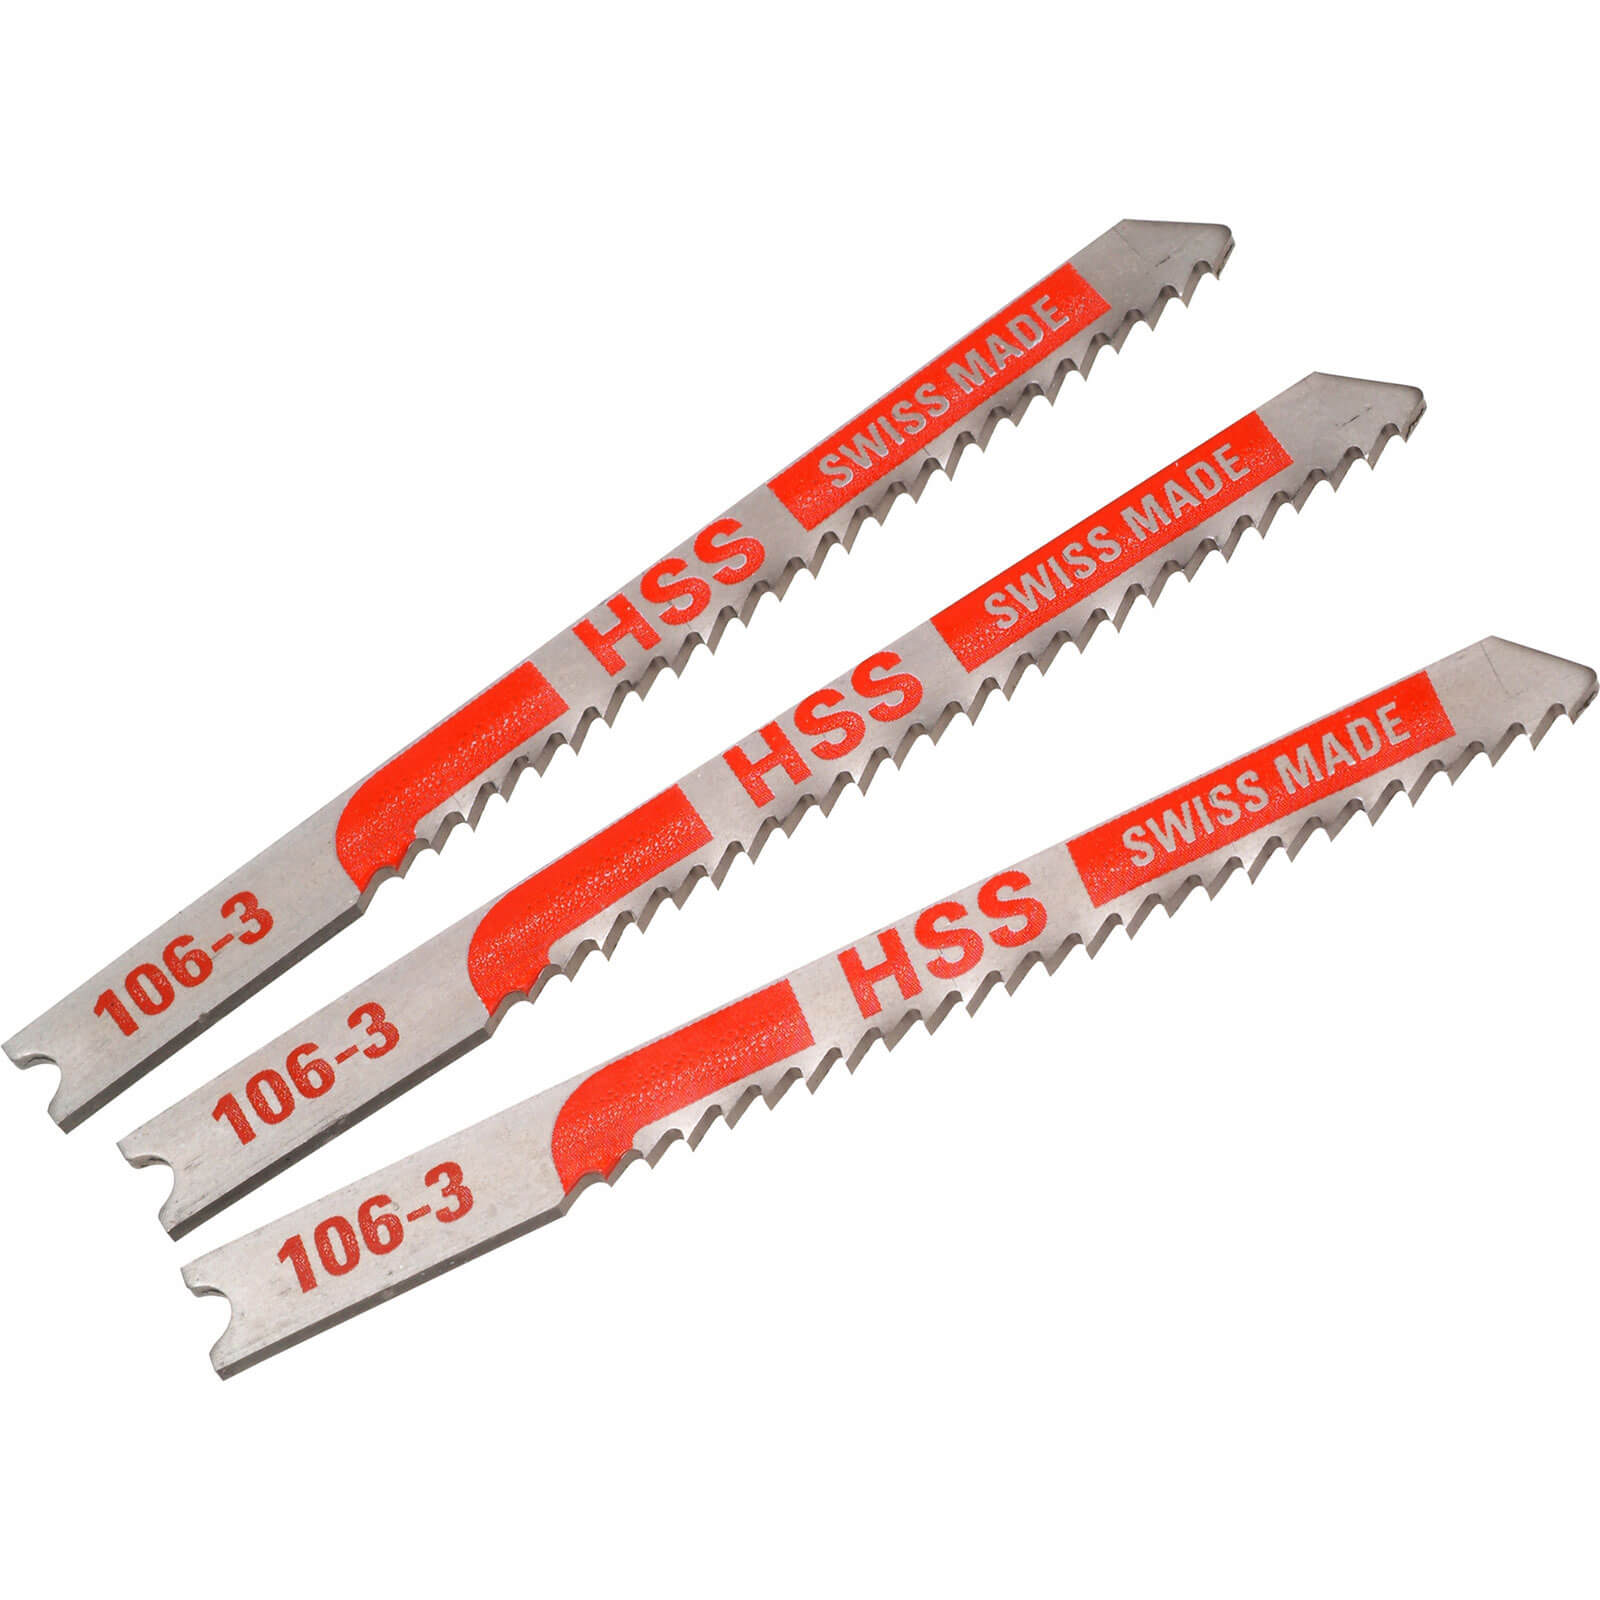 Click to view product details and reviews for Black And Decker X22013 Piranha Metal Hss U Shank Jigsaw Blades Pack Of 3.